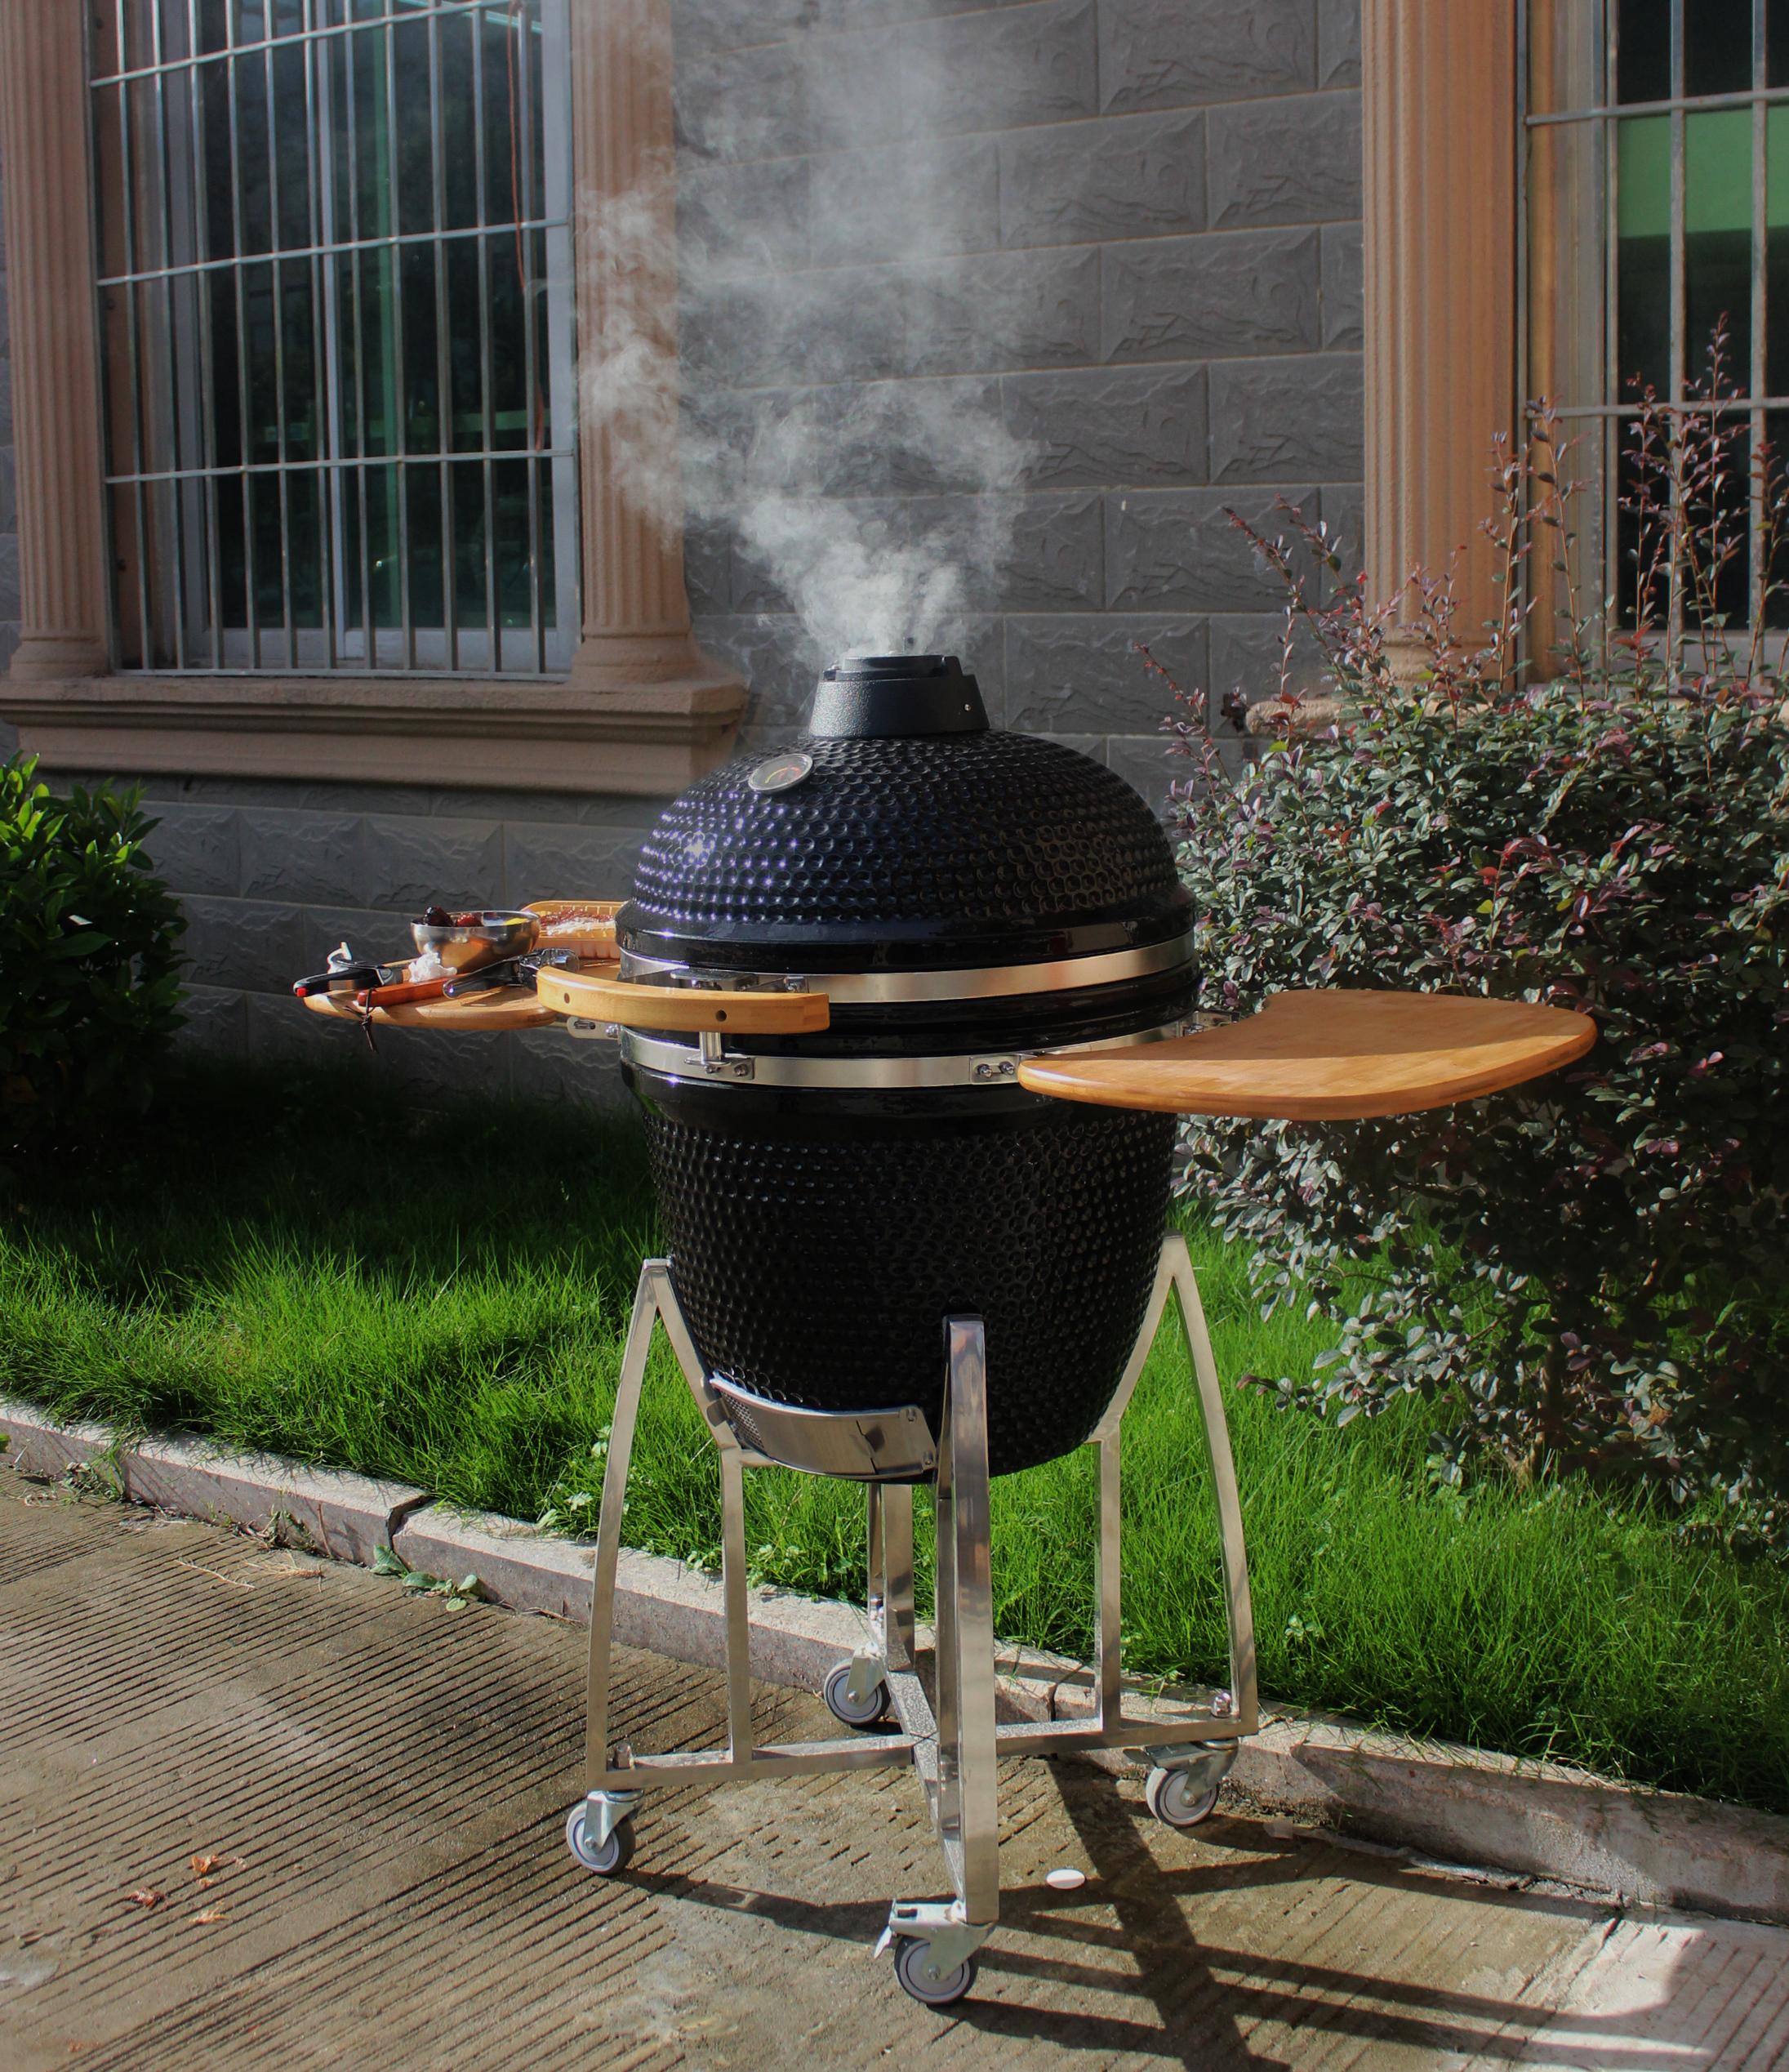 Kamado Grill, New and Innovative BBQ